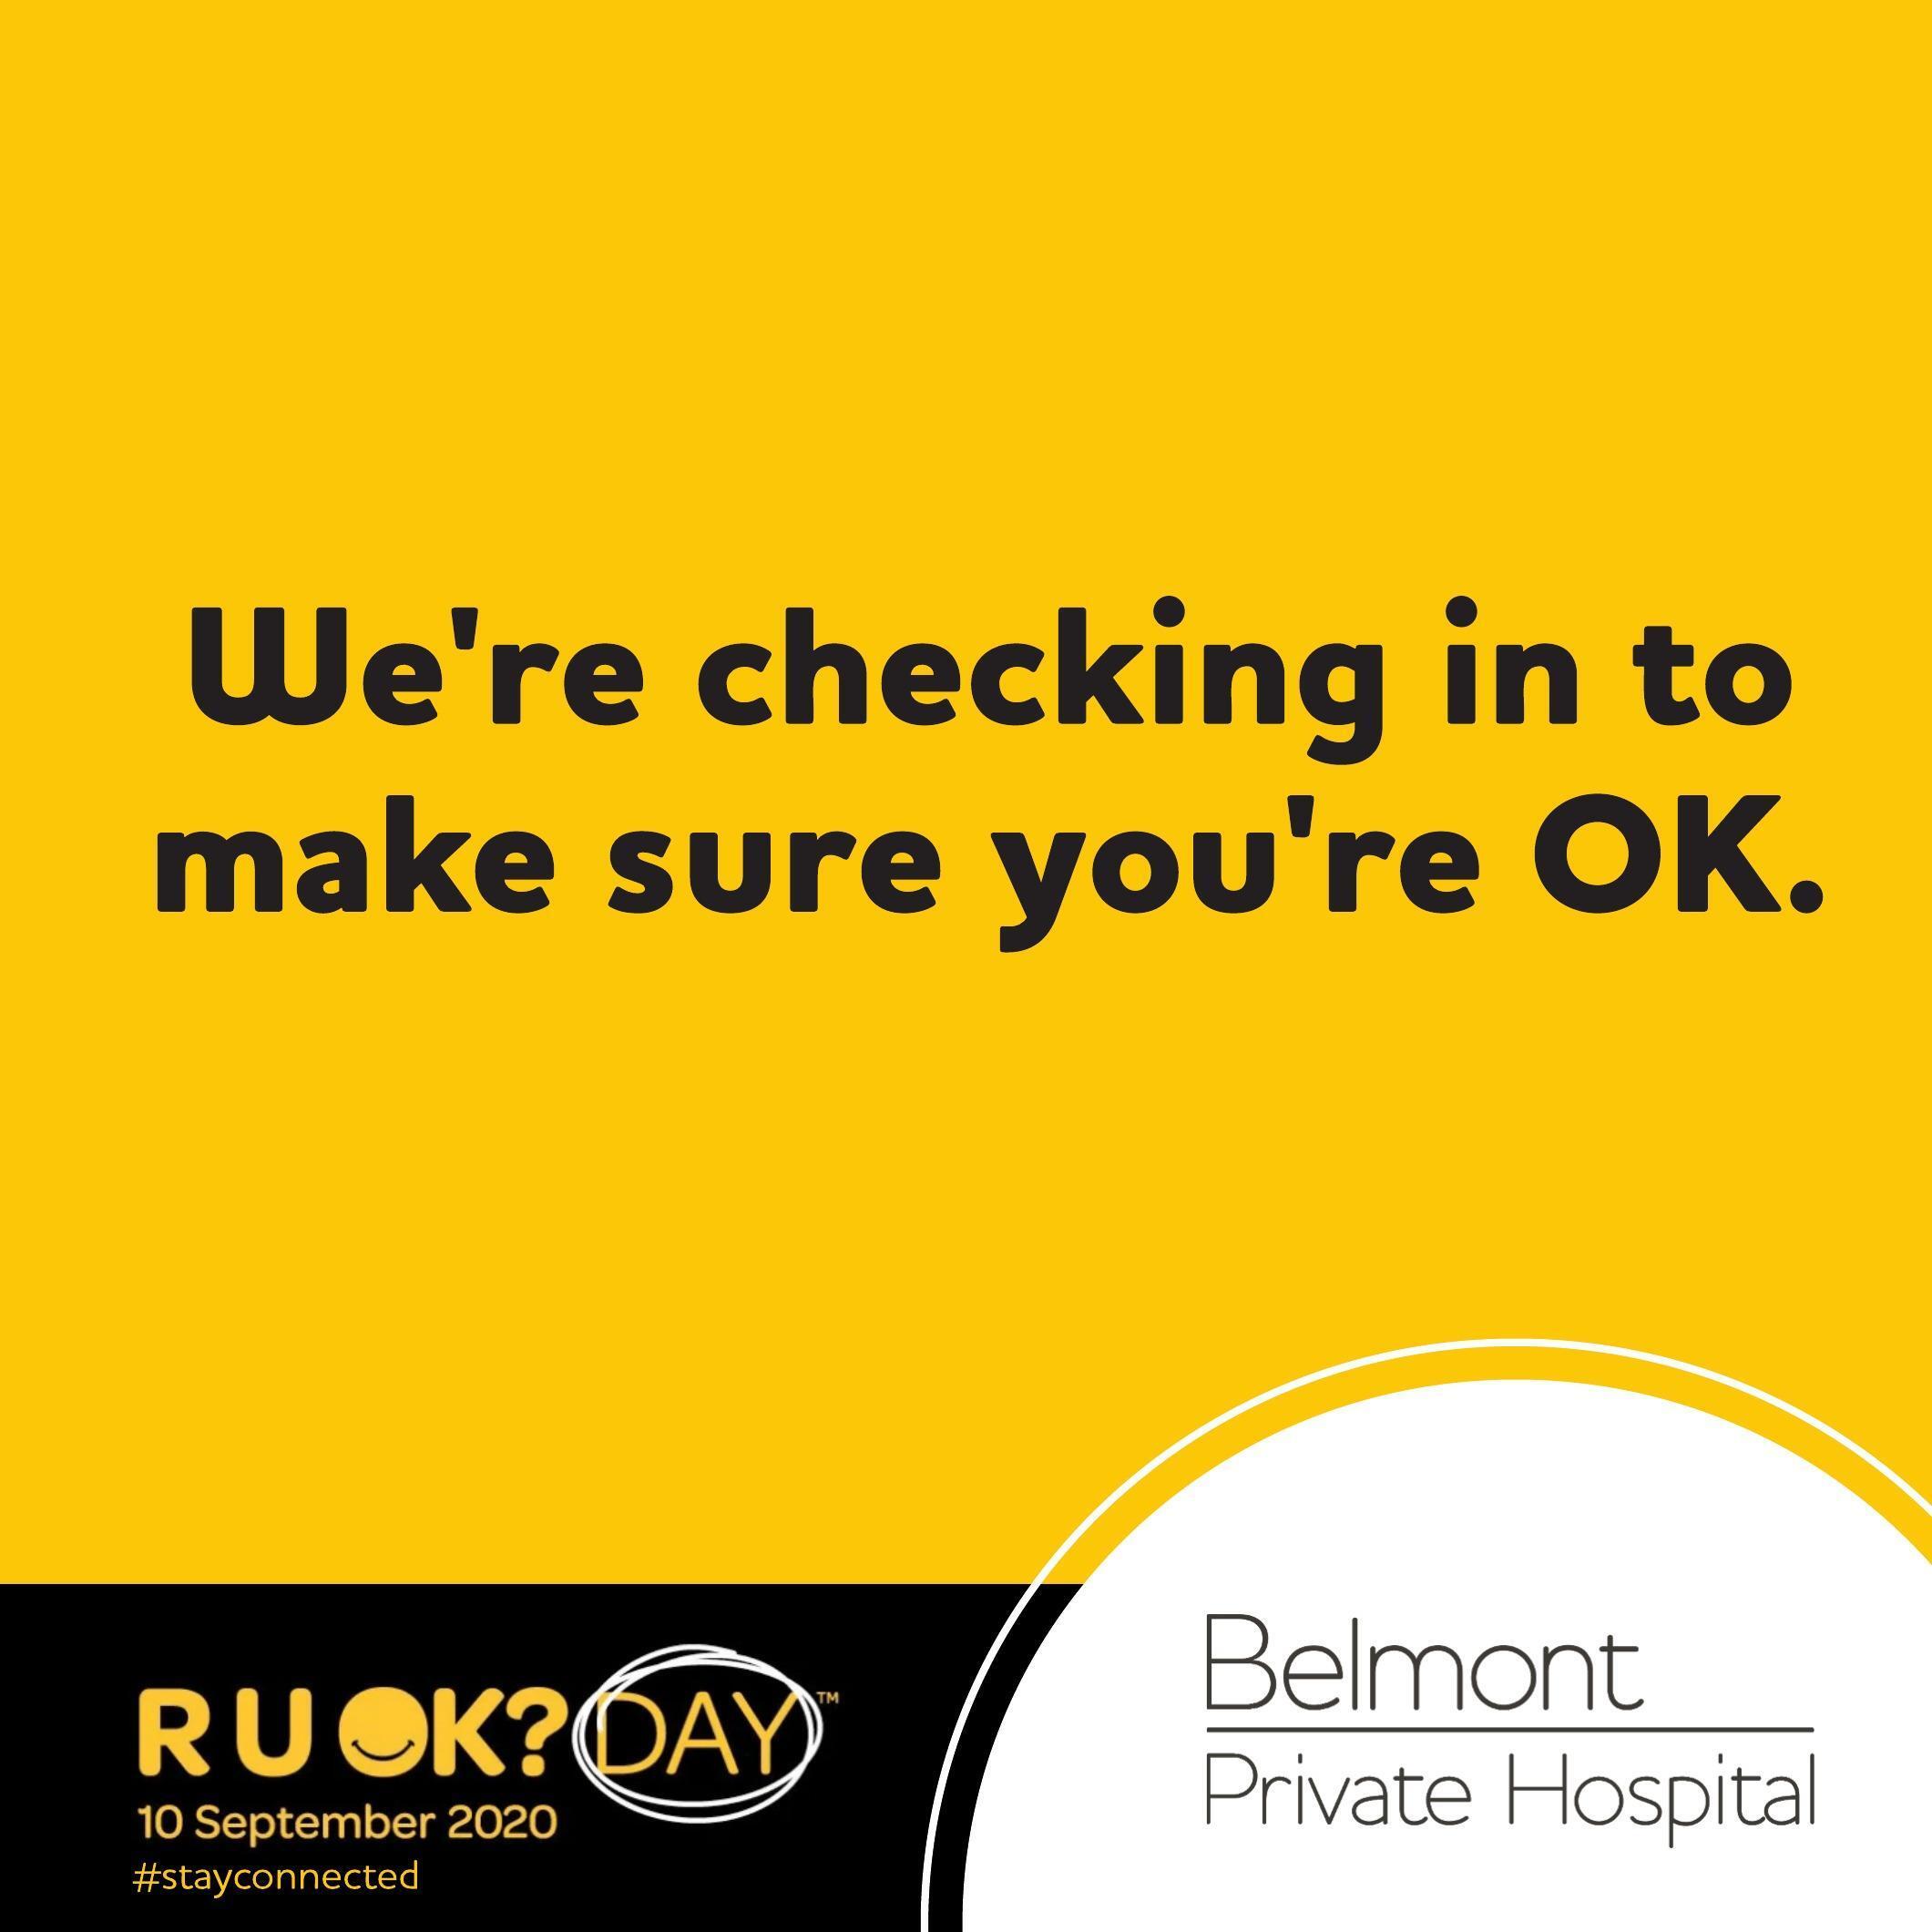 RUOK-DAY_SUICIDE-PREVENTION-2020-TILES-1.jpeg#asset:3852